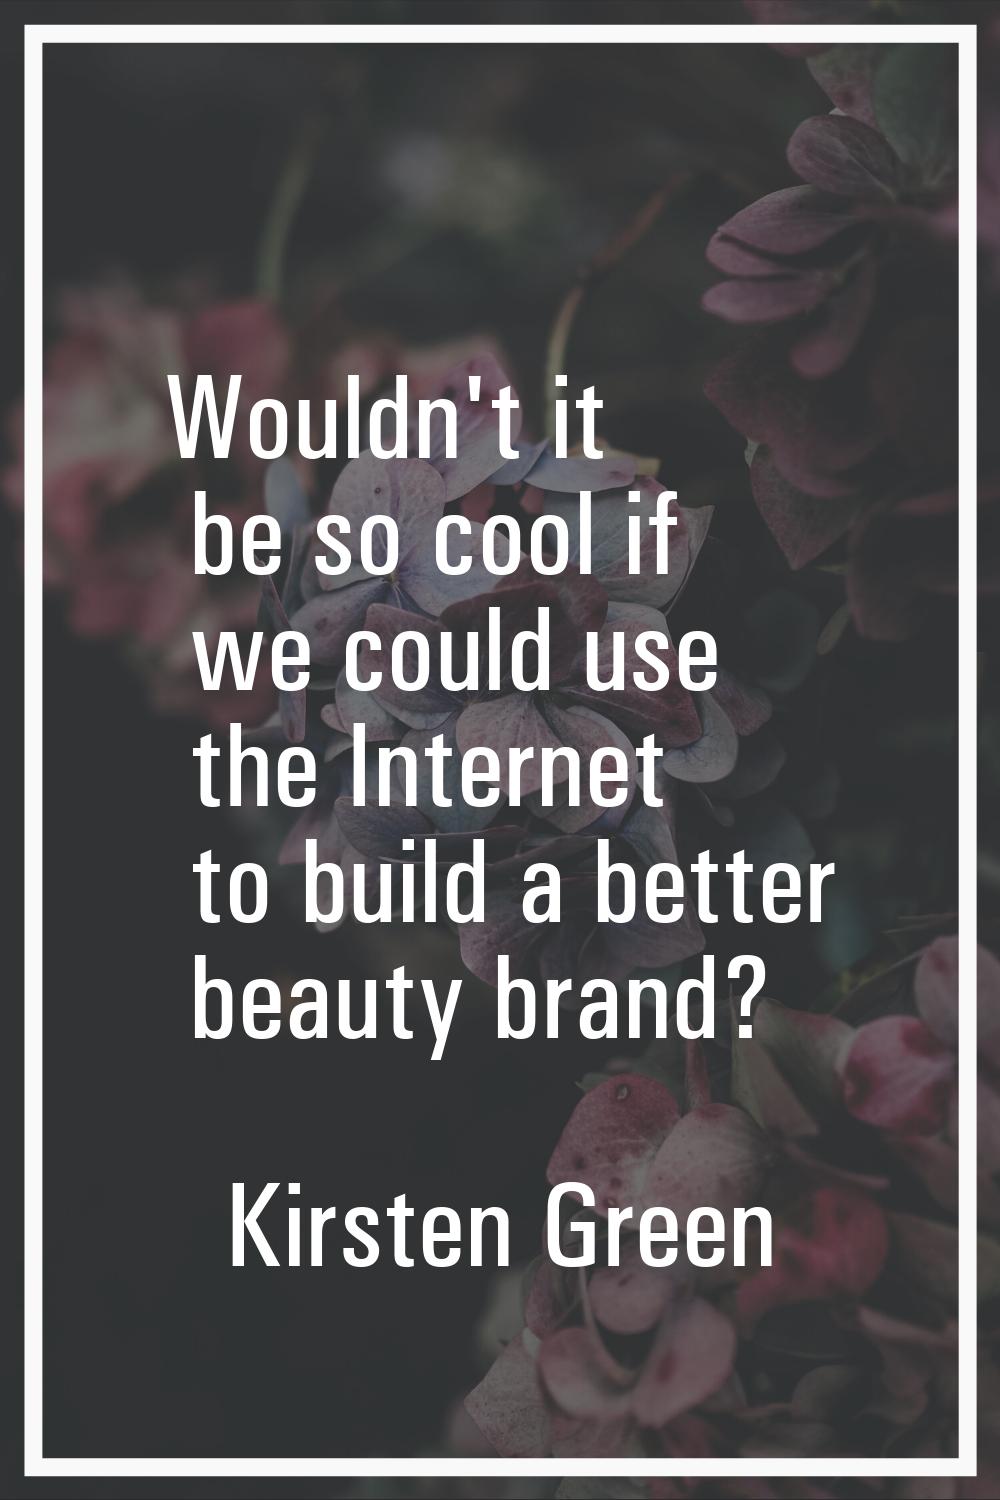 Wouldn't it be so cool if we could use the Internet to build a better beauty brand?